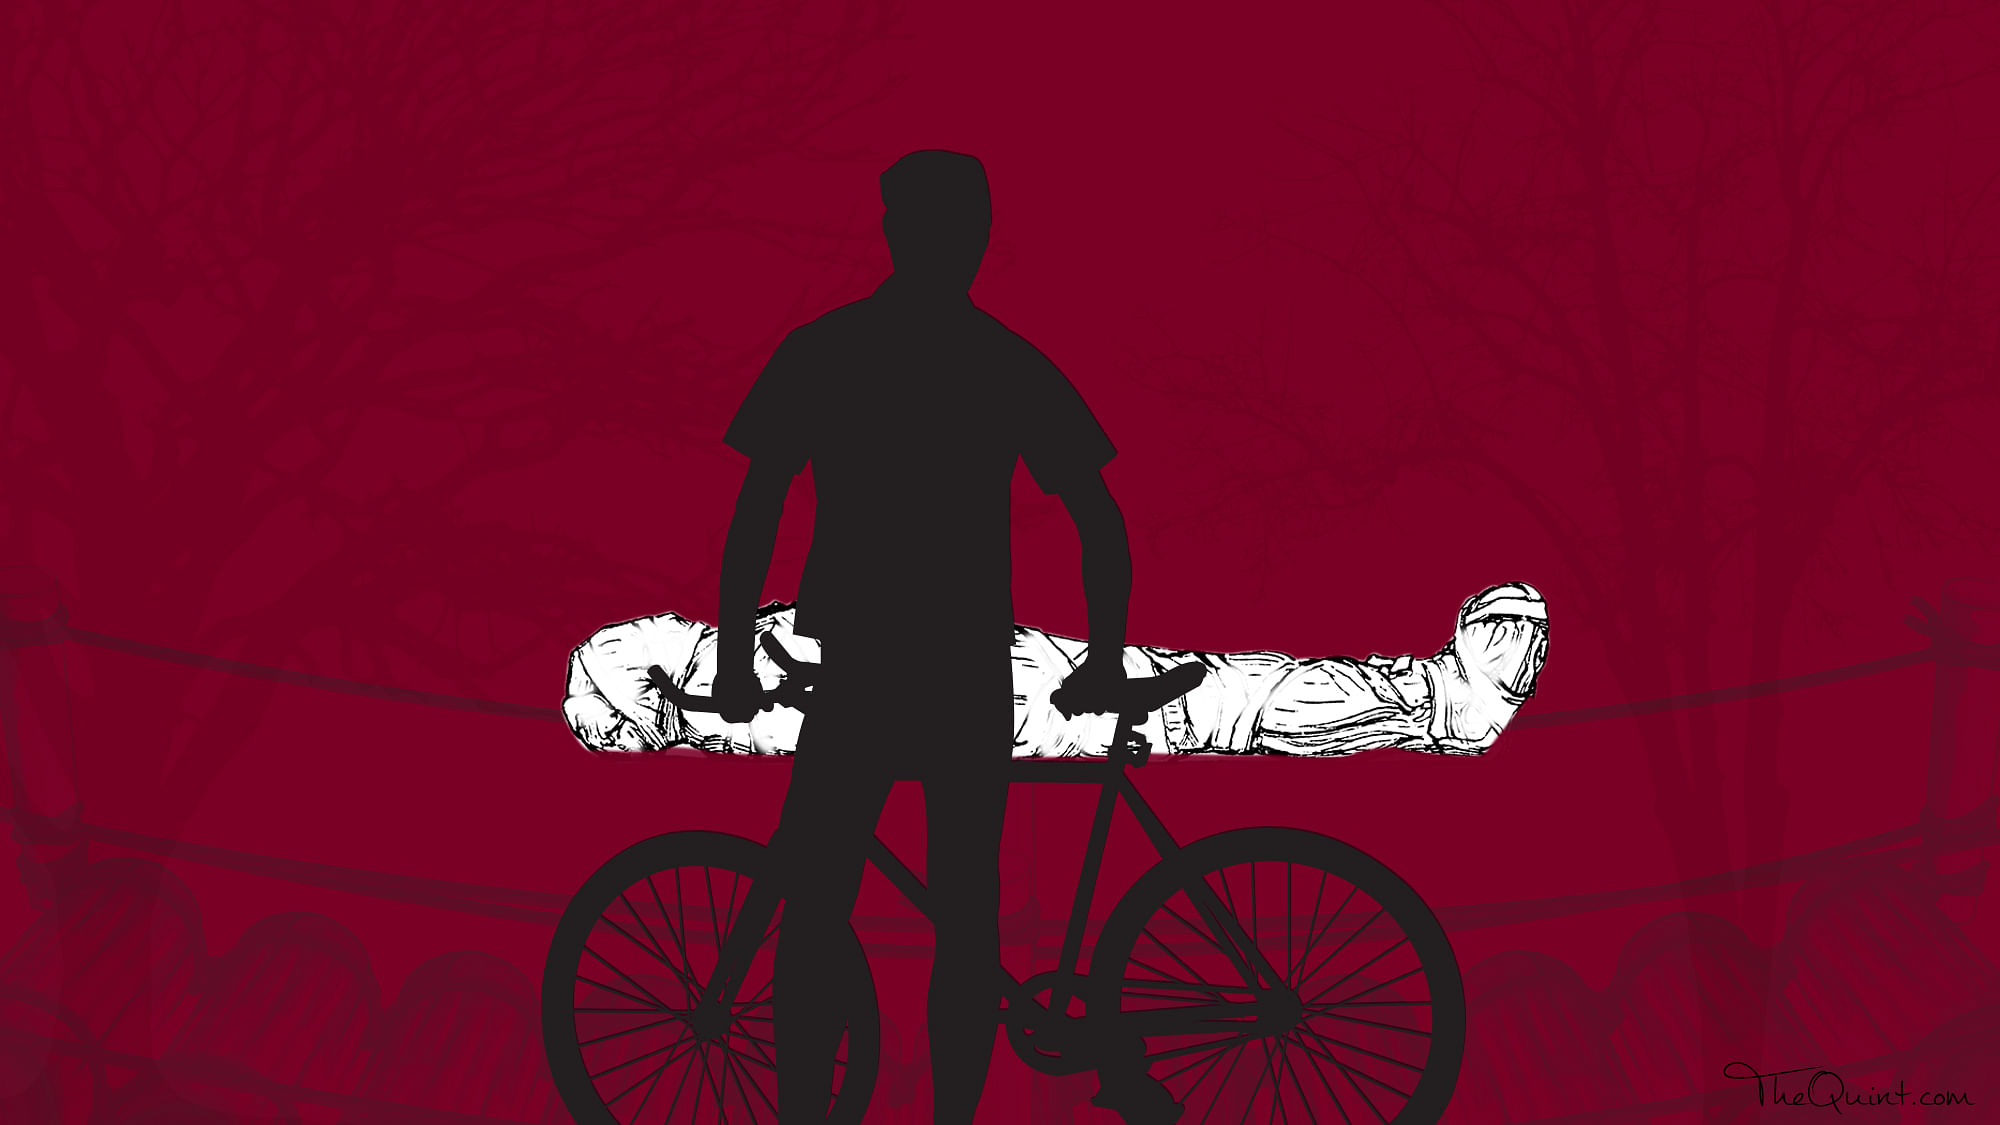 Man in Assam carries dead brother’s body on bicycle (Photo: The Quint)